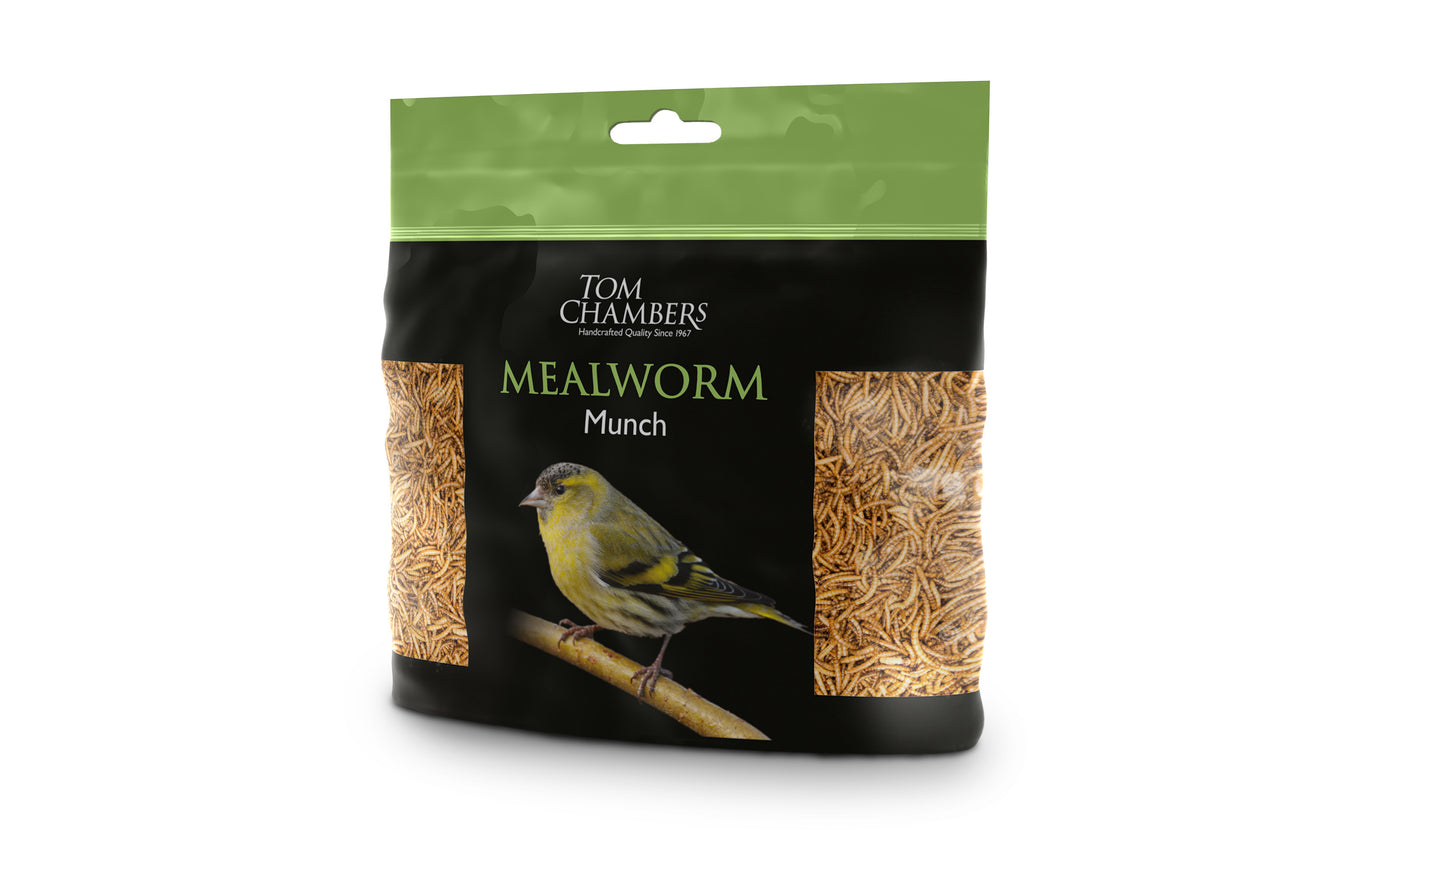 100g bag of mealworm much for birds by tom chambers